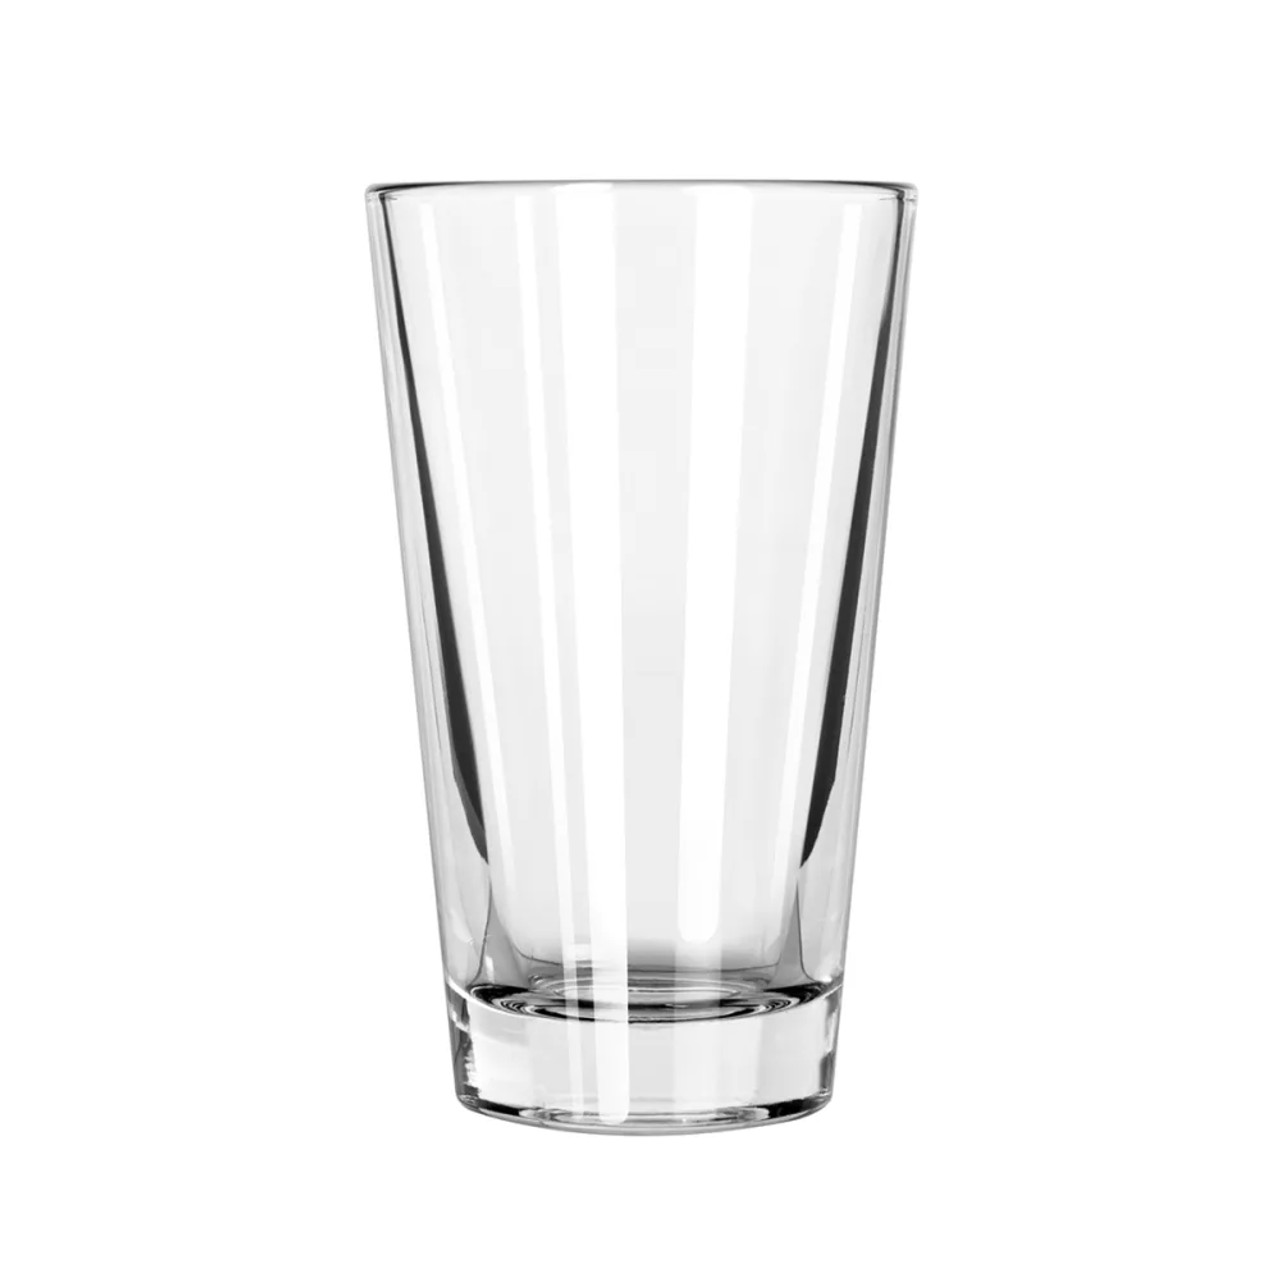 Libbey 15141 14 oz Pint Glass / Cooler Mixing Glass, DuraTuff Treated, 24/Case - Chicken Pieces